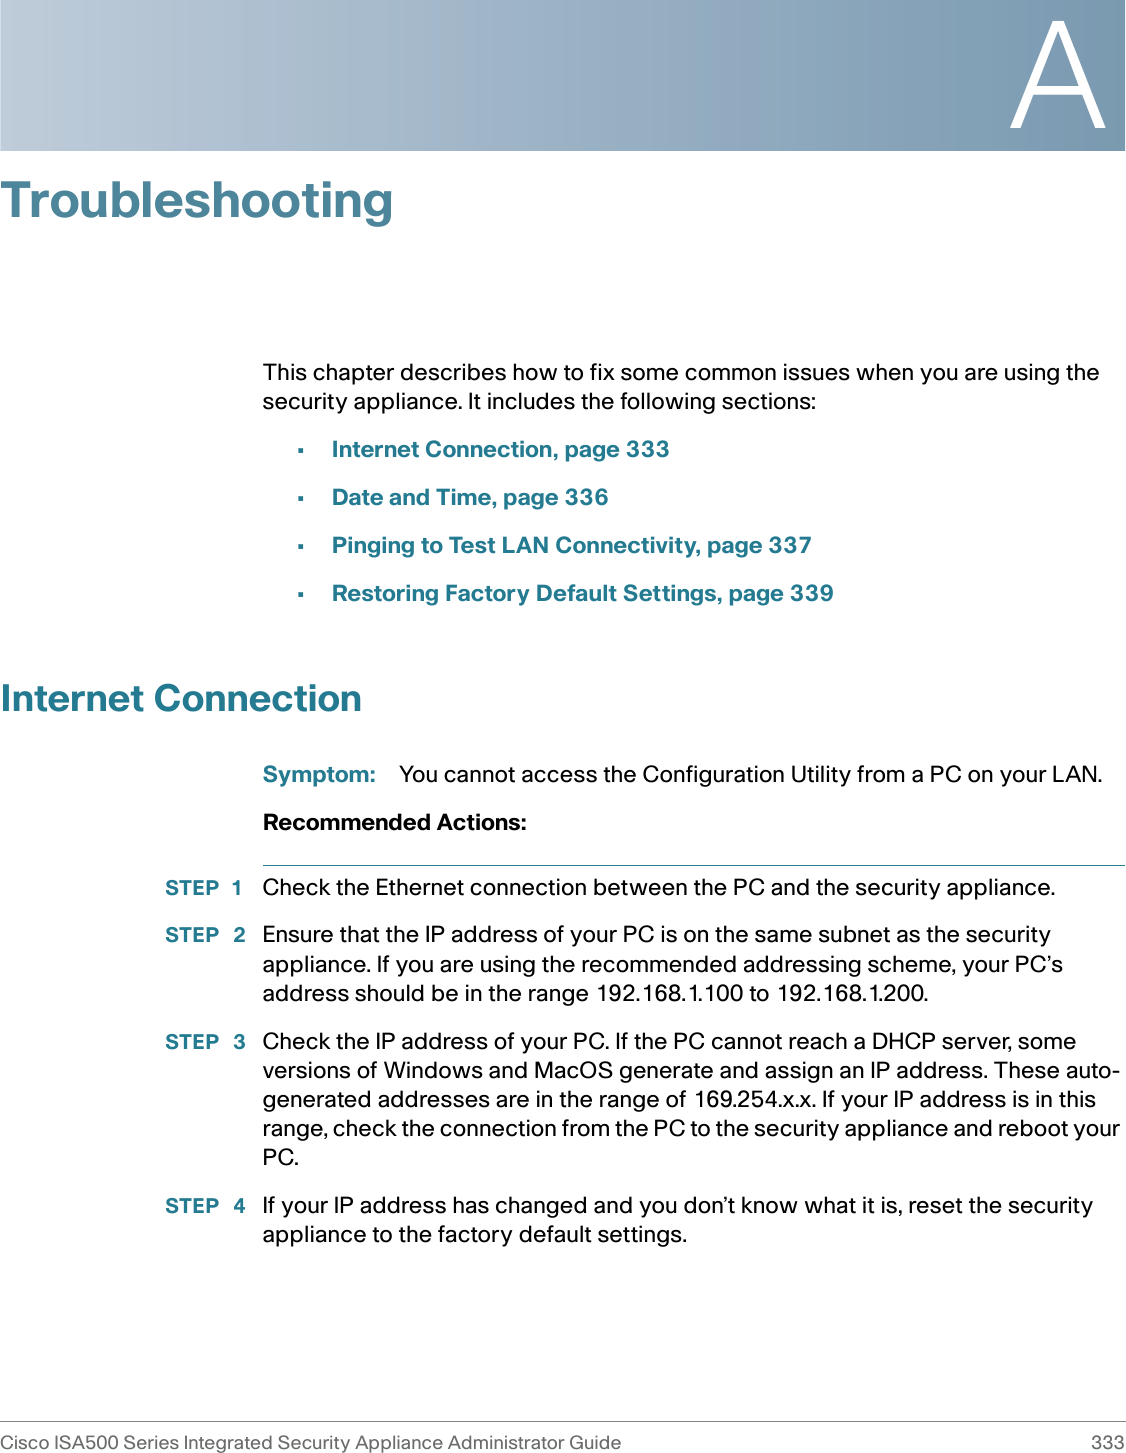 ACisco ISA500 Series Integrated Security Appliance Administrator Guide 333 TroubleshootingThis chapter describes how to fix some common issues when you are using the security appliance. It includes the following sections: •Internet Connection, page 333•Date and Time, page 336•Pinging to Test LAN Connectivity, page 337•Restoring Factory Default Settings, page 339Internet ConnectionSymptom: You cannot access the Configuration Utility from a PC on your LAN.Recommended Actions: STEP 1 Check the Ethernet connection between the PC and the security appliance.STEP  2 Ensure that the IP address of your PC is on the same subnet as the security appliance. If you are using the recommended addressing scheme, your PC’s address should be in the range 192.168.1.100 to 192.168.1.200.STEP  3 Check the IP address of your PC. If the PC cannot reach a DHCP server, some versions of Windows and MacOS generate and assign an IP address. These auto-generated addresses are in the range of 169.254.x.x. If your IP address is in this range, check the connection from the PC to the security appliance and reboot your PC.STEP  4 If your IP address has changed and you don’t know what it is, reset the security appliance to the factory default settings. 